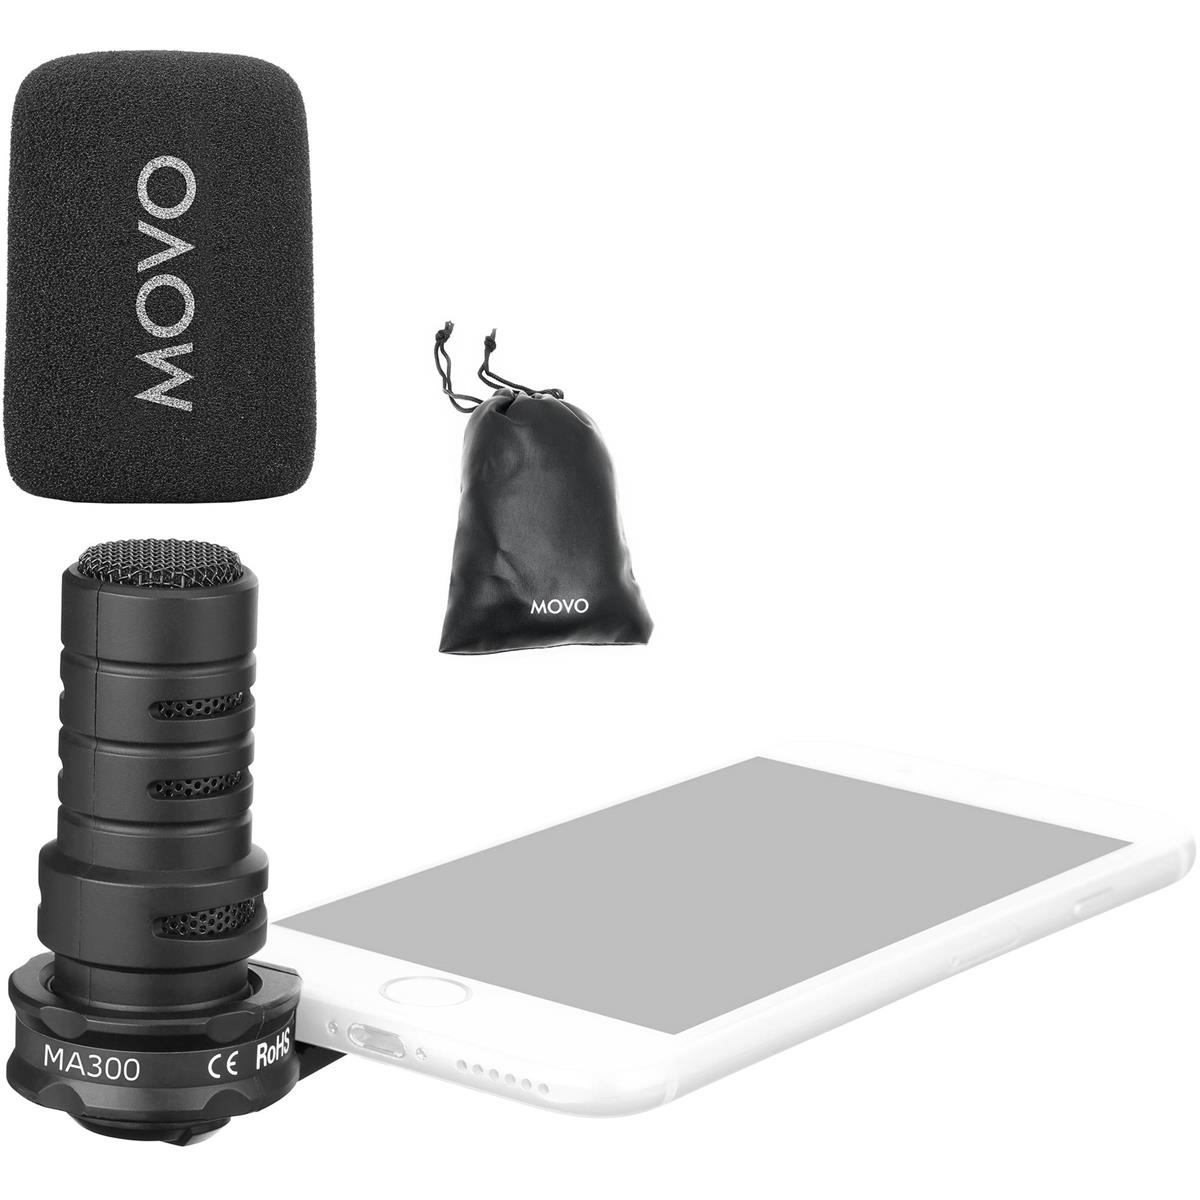 Image of Movo Photo MA300 Compact TRRS Omnidirectional Microphone with 3.5mm Input Jack